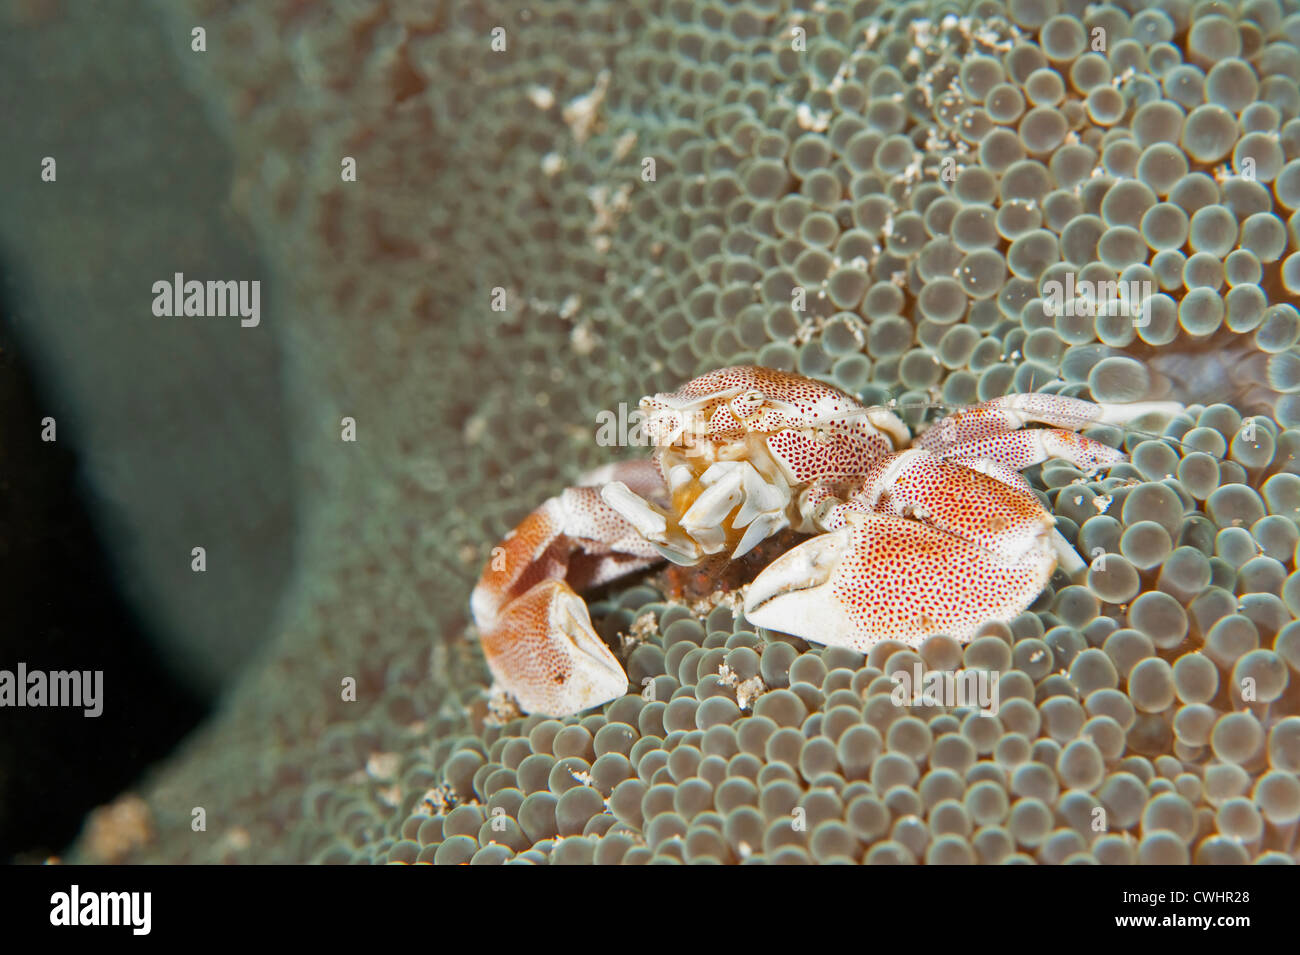 An Anemone Crab in its host anemone in North Sulawesi. Stock Photo